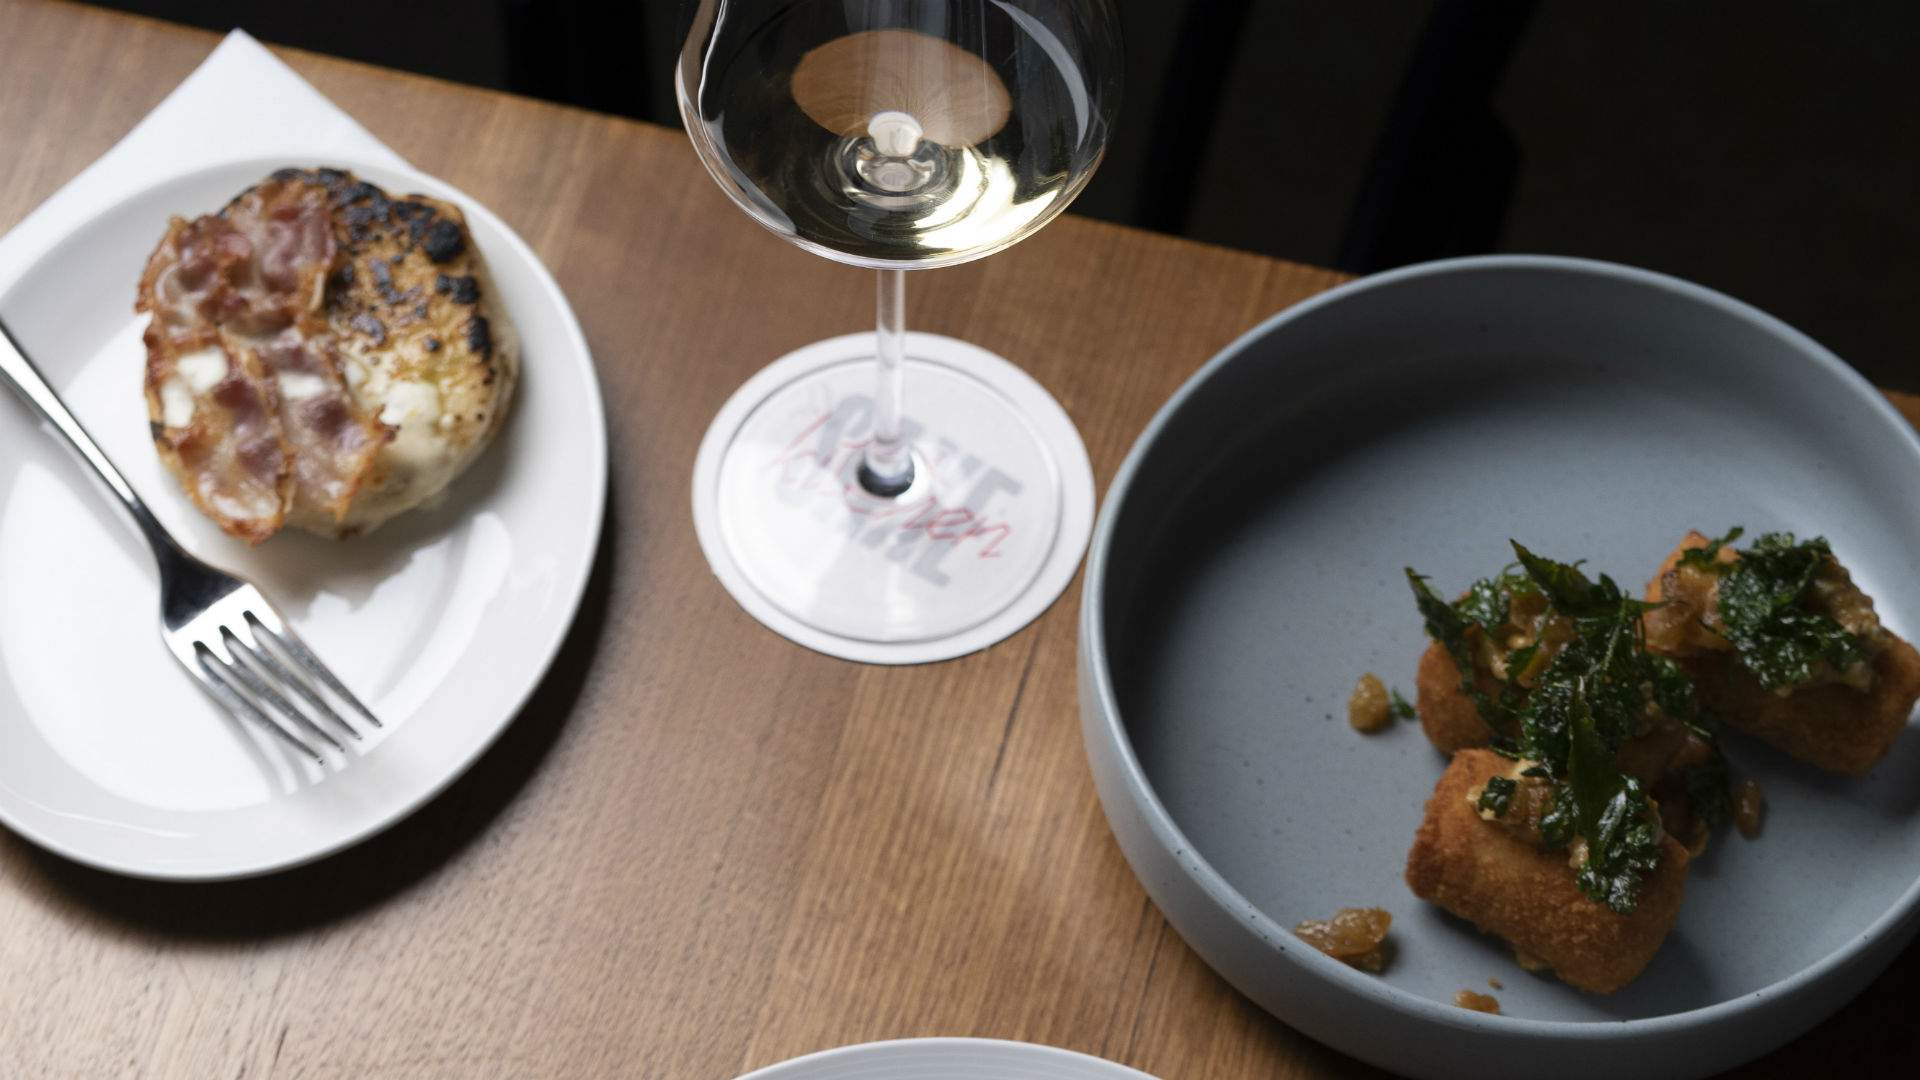 The CBD's Acclaimed Saxe Now Has a Second, Cheaper Restaurant Underneath It